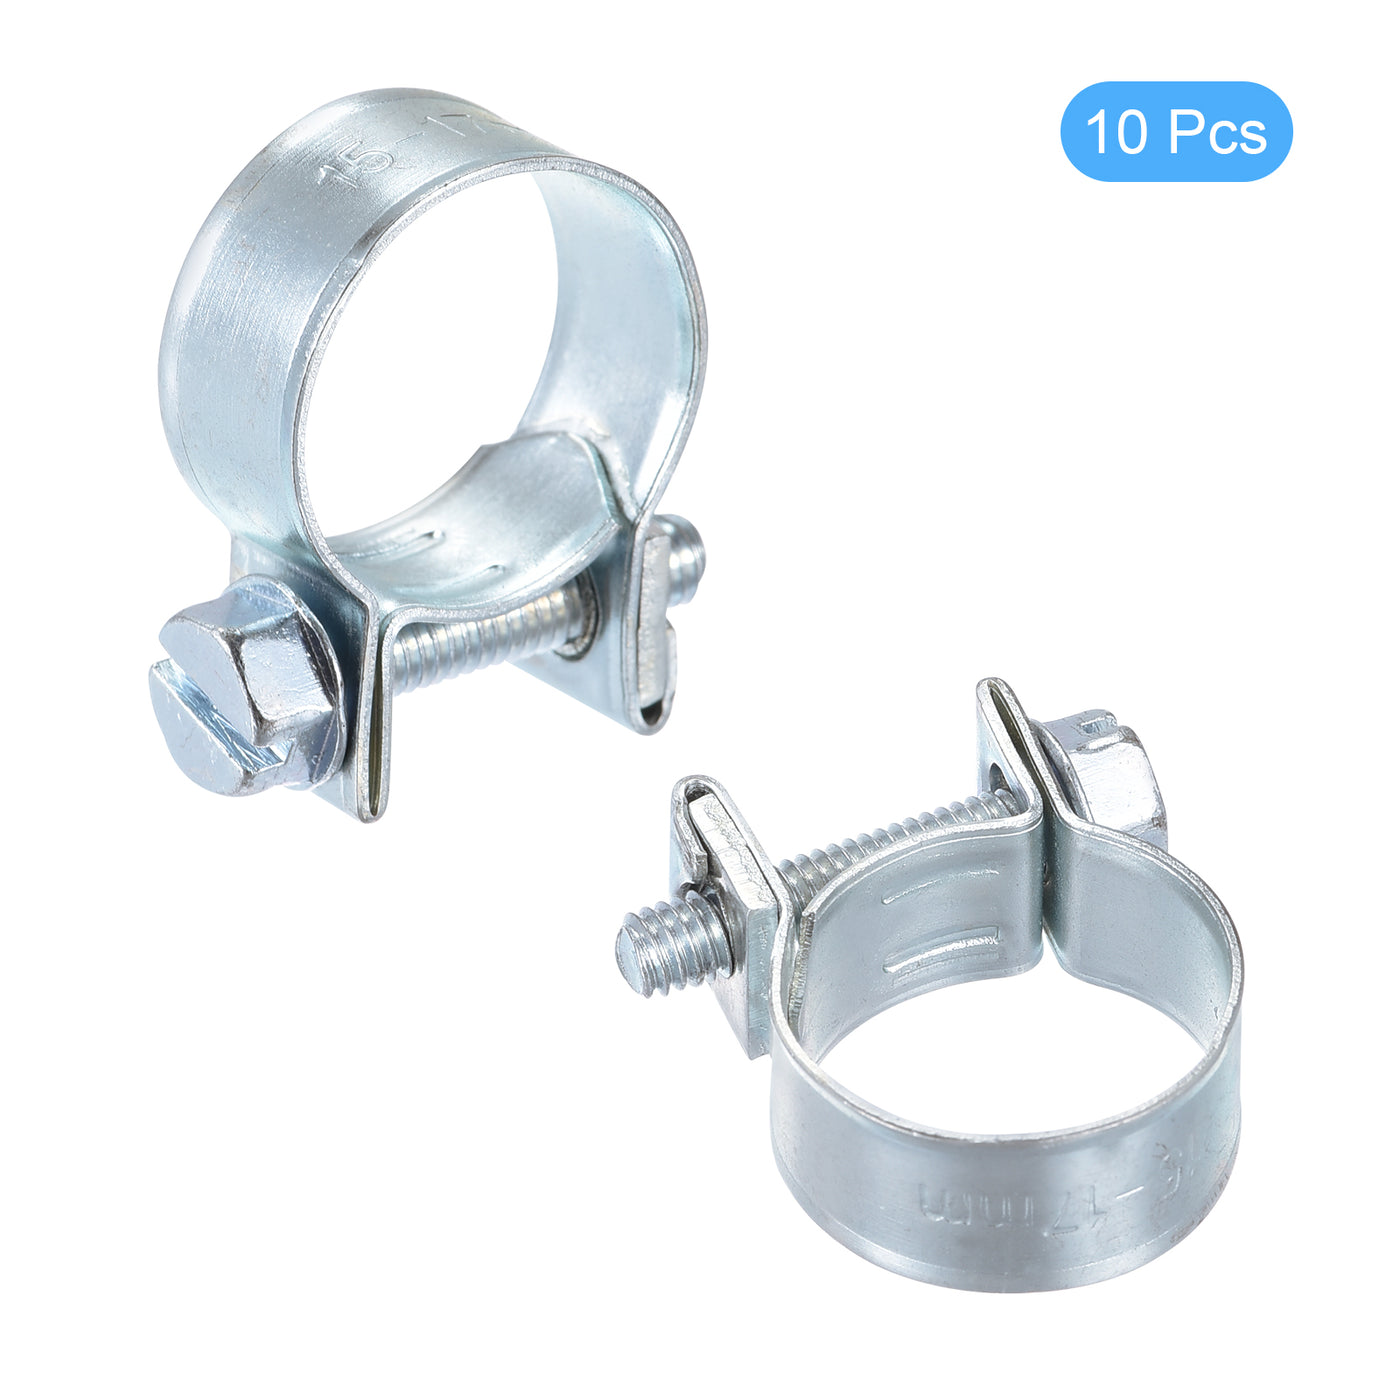 Uxcell Uxcell 19-21mm Mini Fuel Injection Hose Clamp Zinc Plated Steel Fuel Line Clamp 10pcs